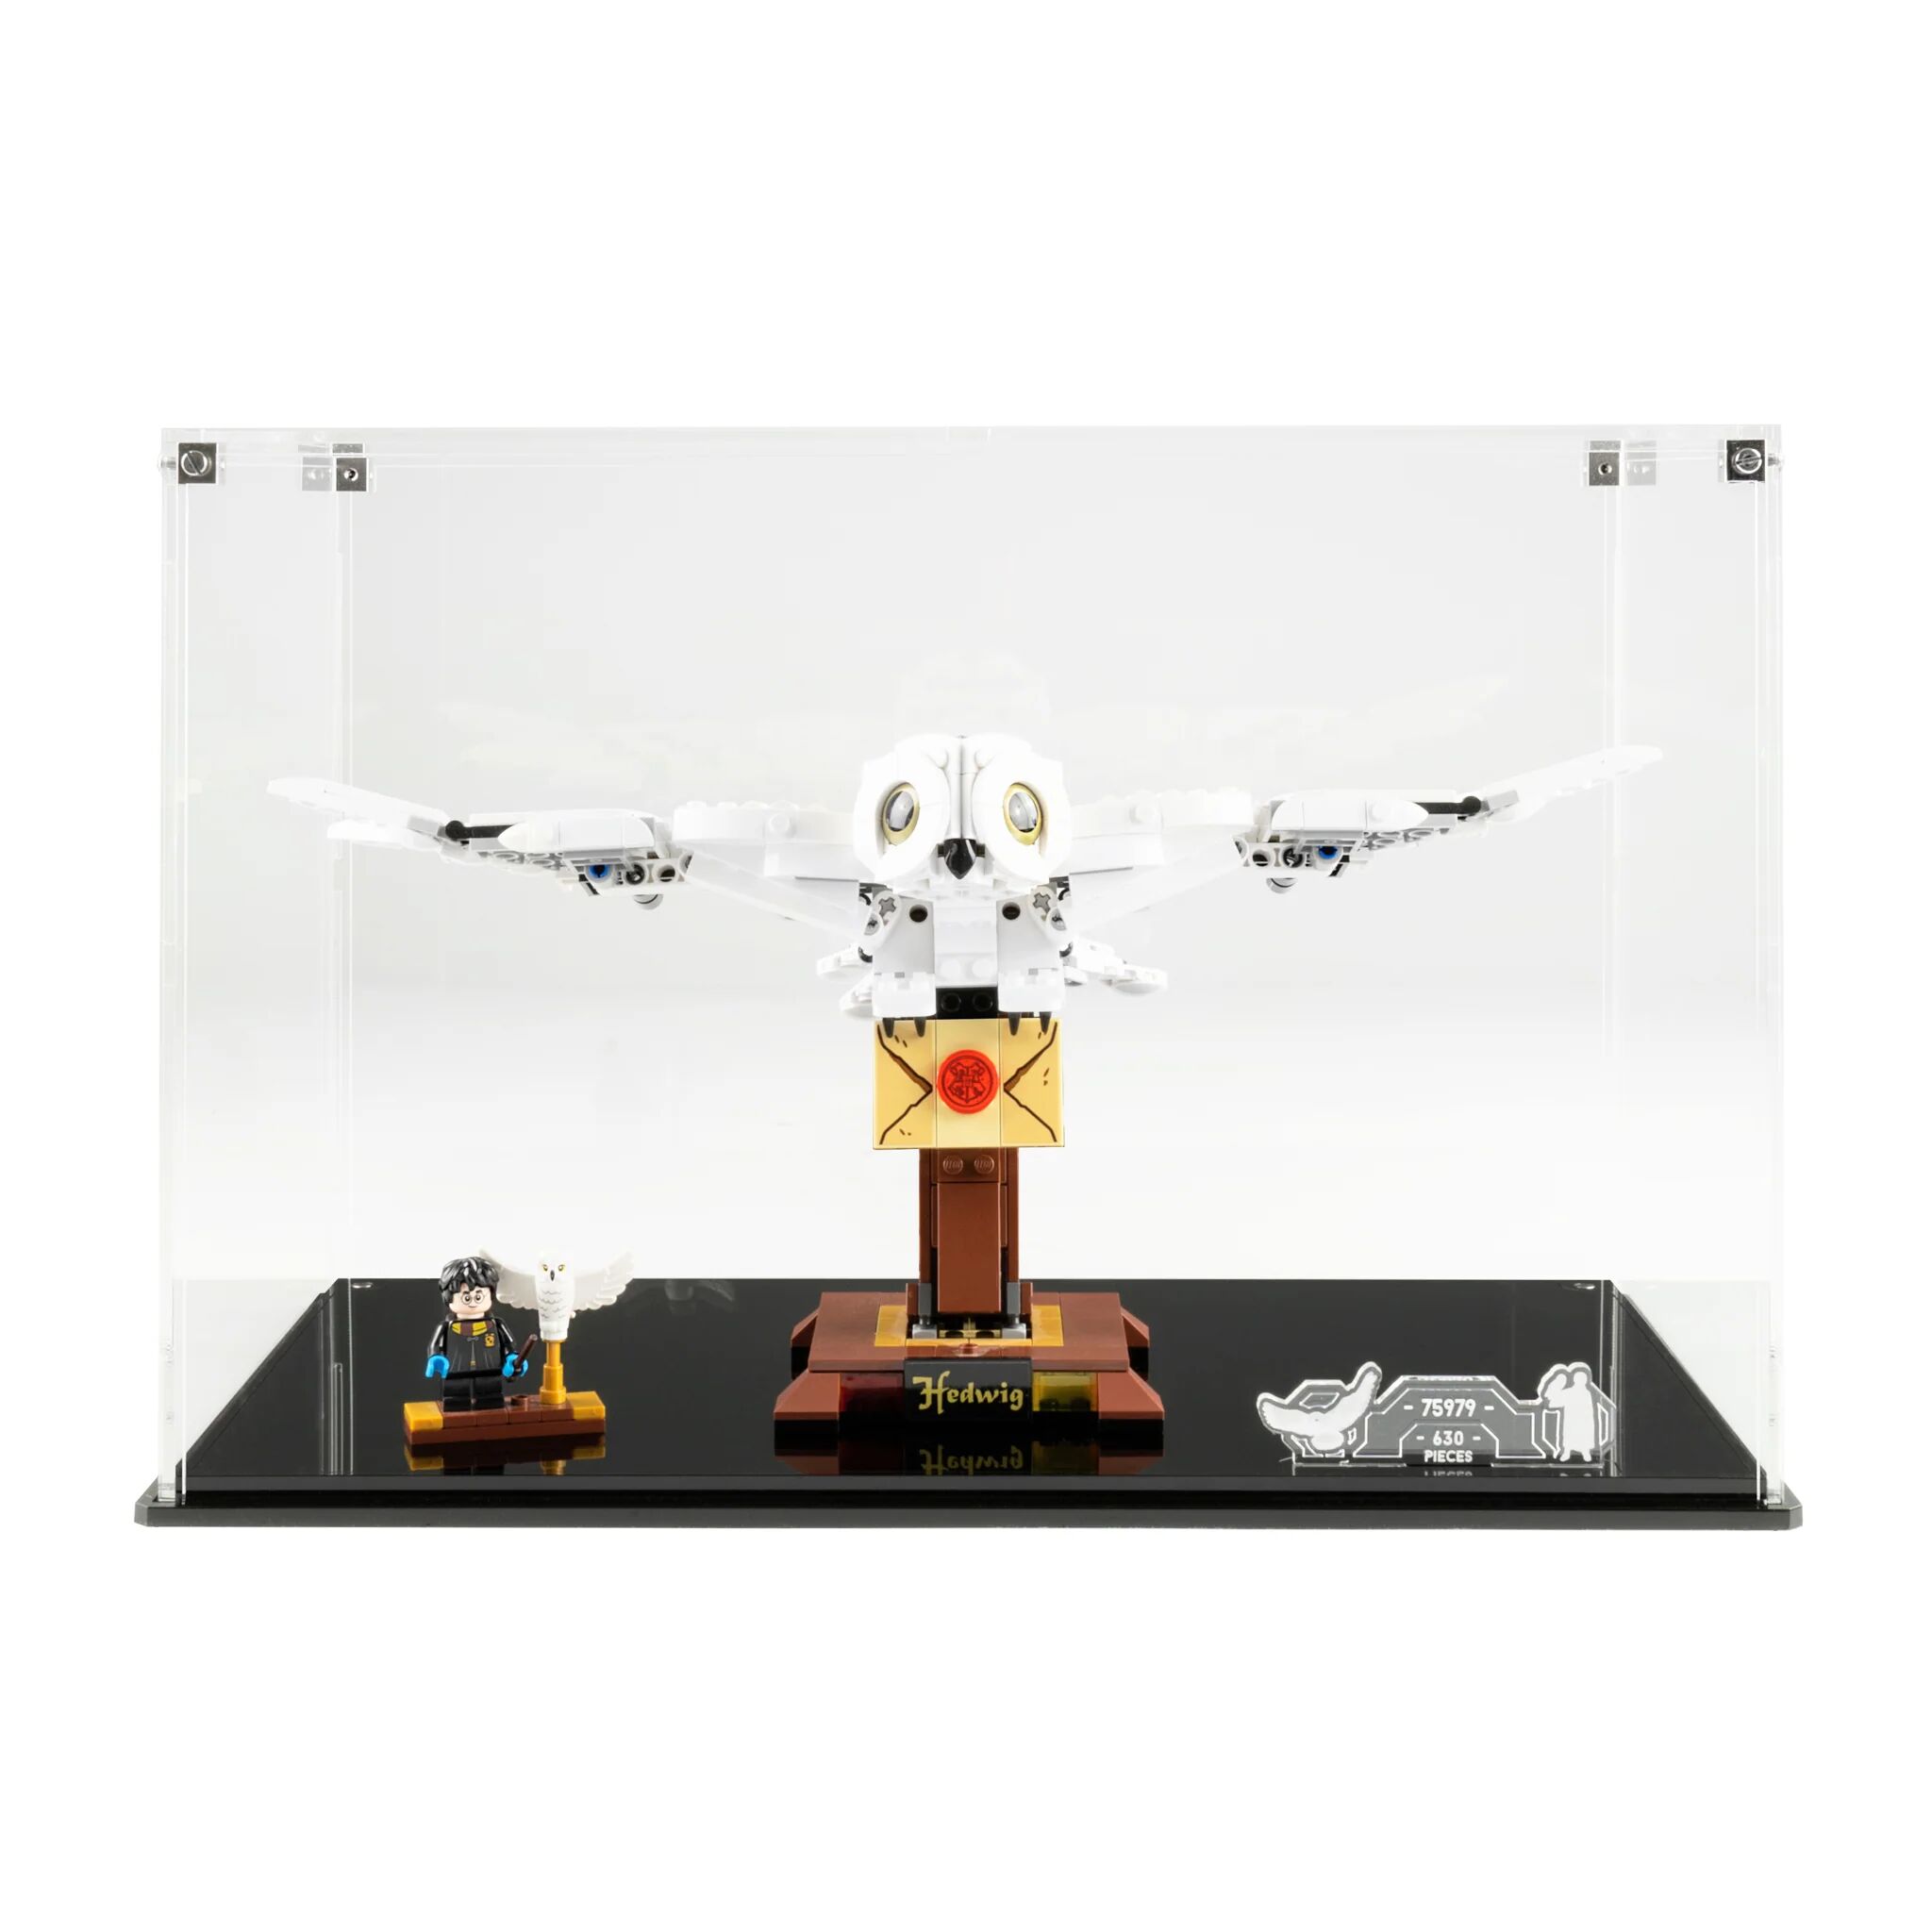 Wicked Brick Display case for LEGO® Harry Potter: Hedwig (75979) - Display case